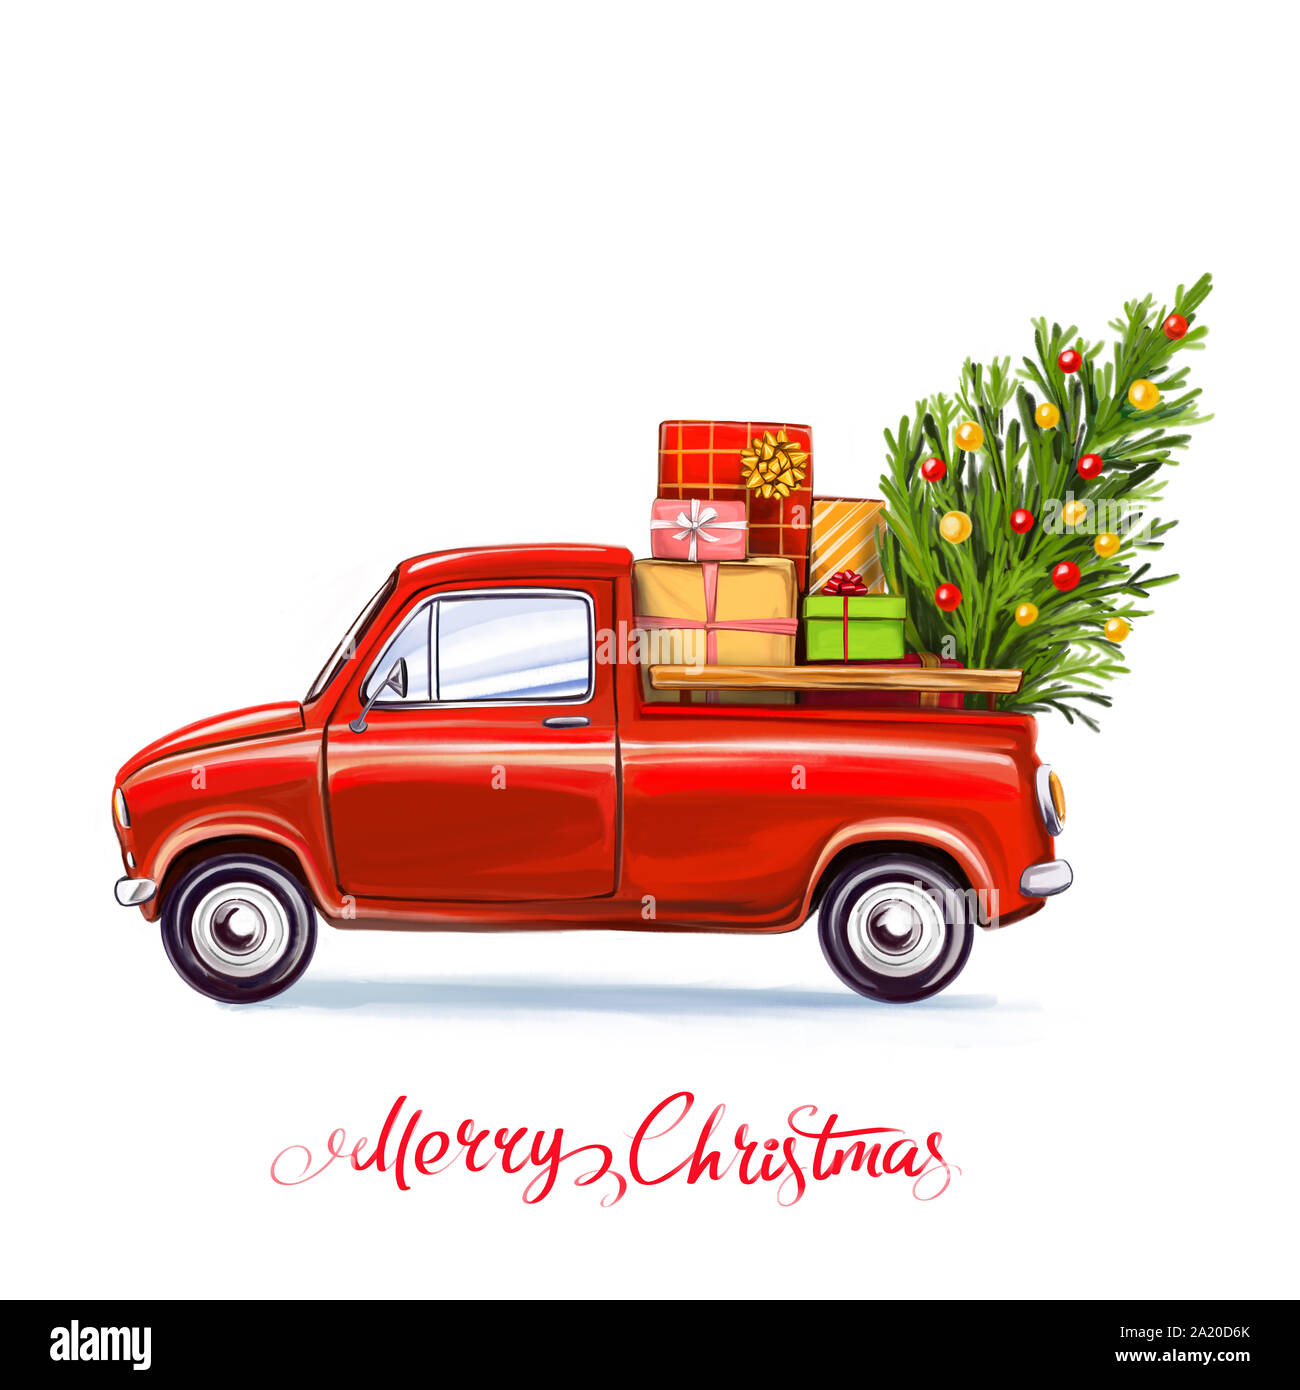 Christmas tree and gifts on the car, Decorative Christmas ornament, art illustration painted with watercolors isolated on white background Stock Photo